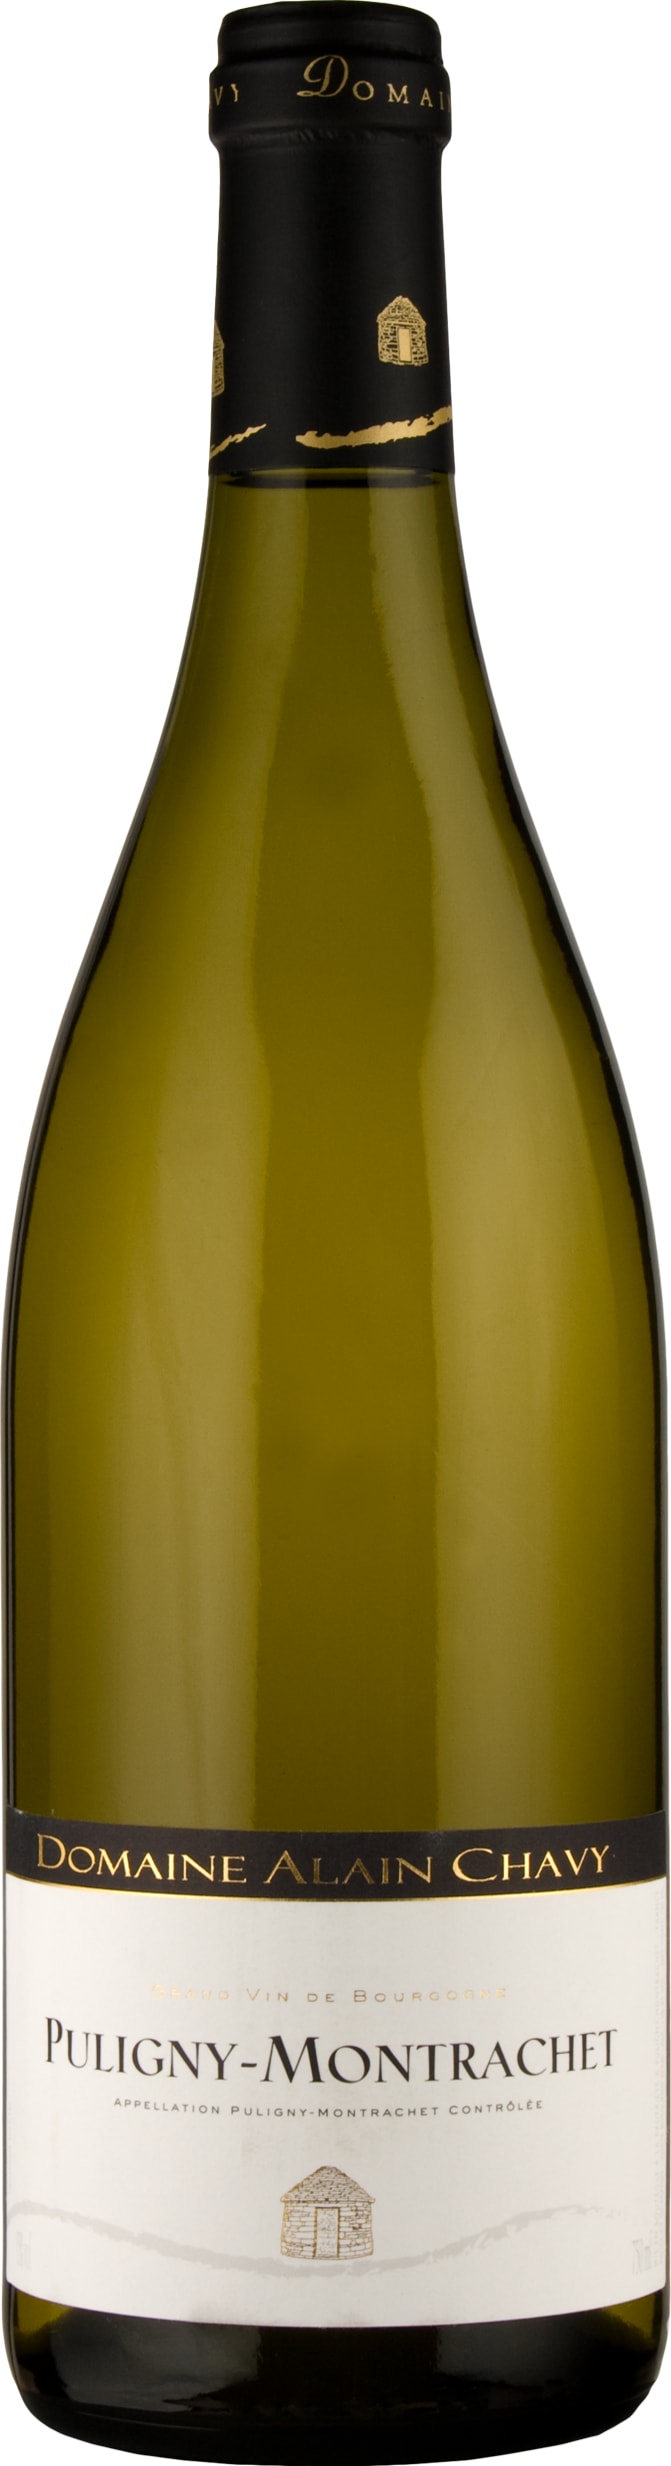 Alain Chavy Puligny-Montrachet 2021 75cl - Buy Alain Chavy Wines from GREAT WINES DIRECT wine shop